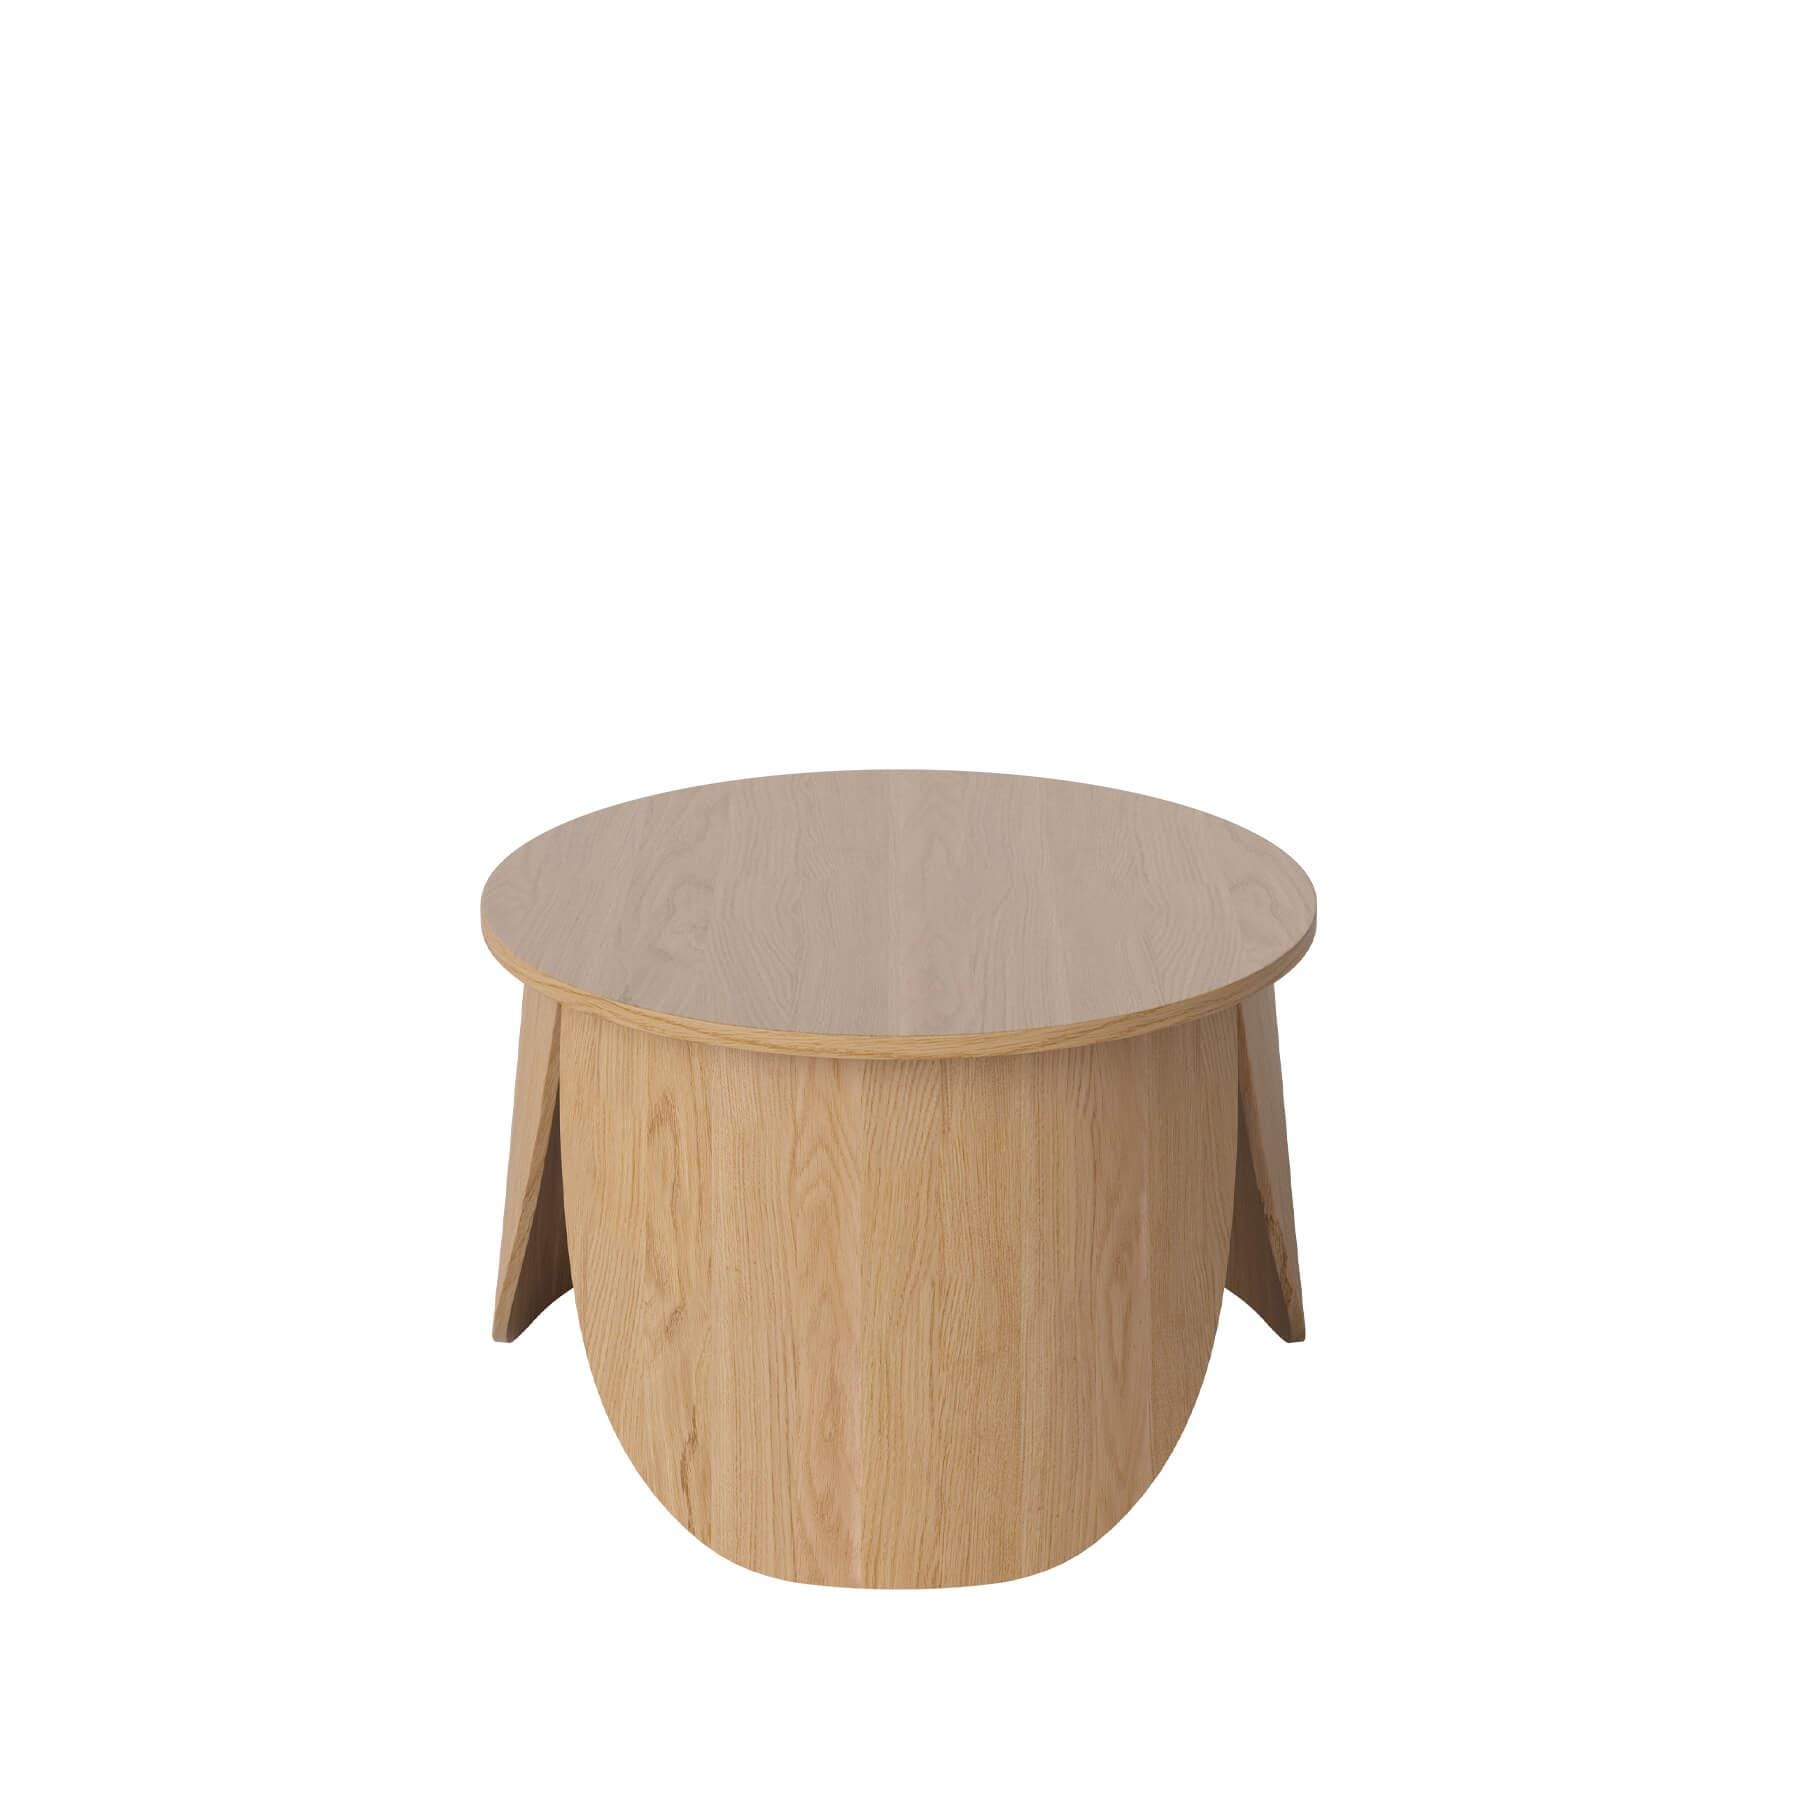 Bolia Peyote Coffee Table Small Low Lacquered Oak Light Wood Designer Furniture From Holloways Of Ludlow